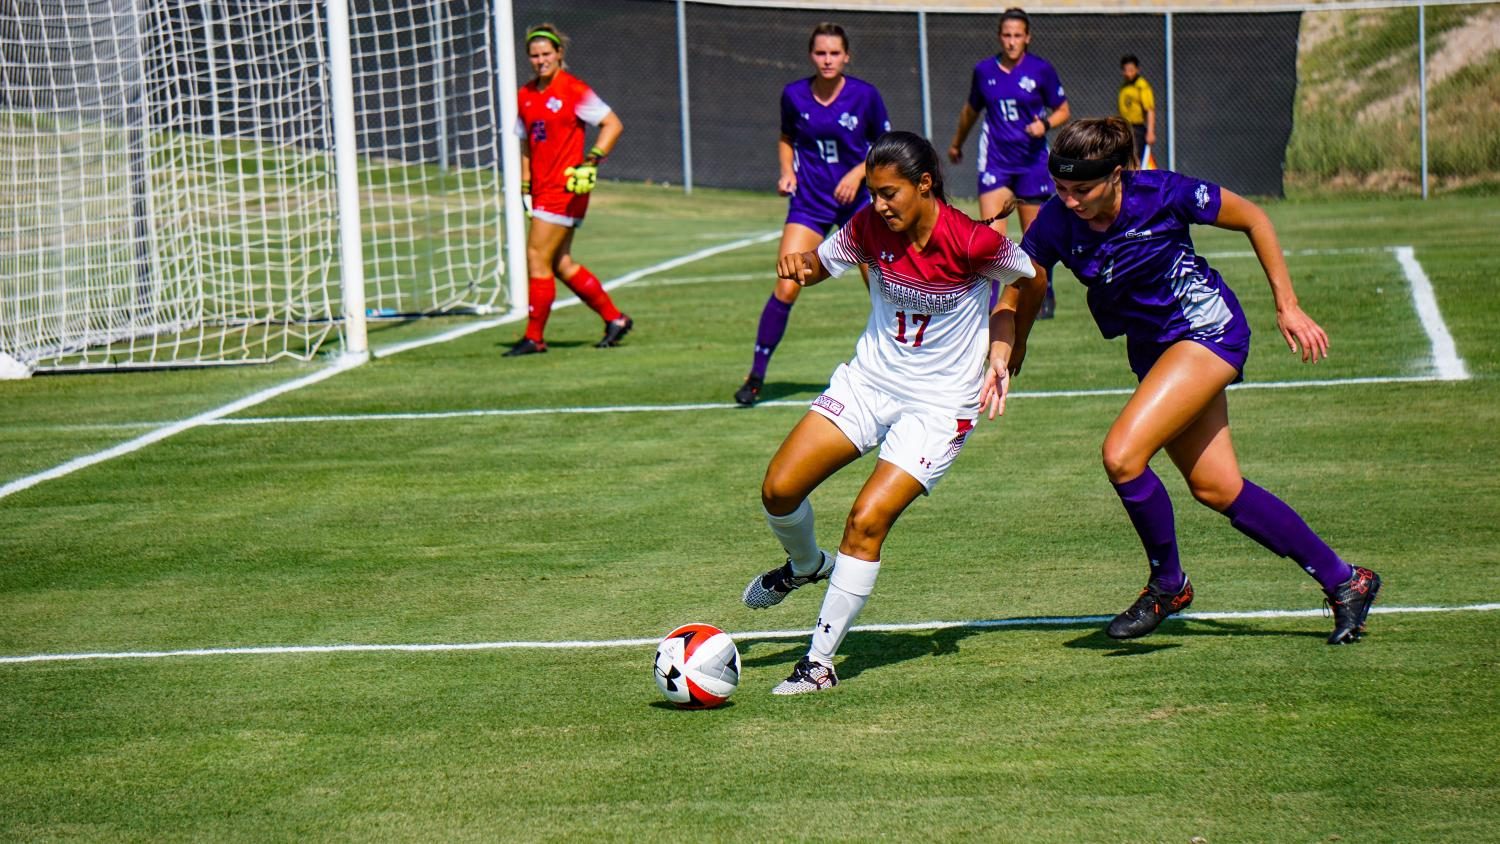 NMSU fell to Stephen F. Austin 1-0 Friday afternoon at the Soccer Complex.